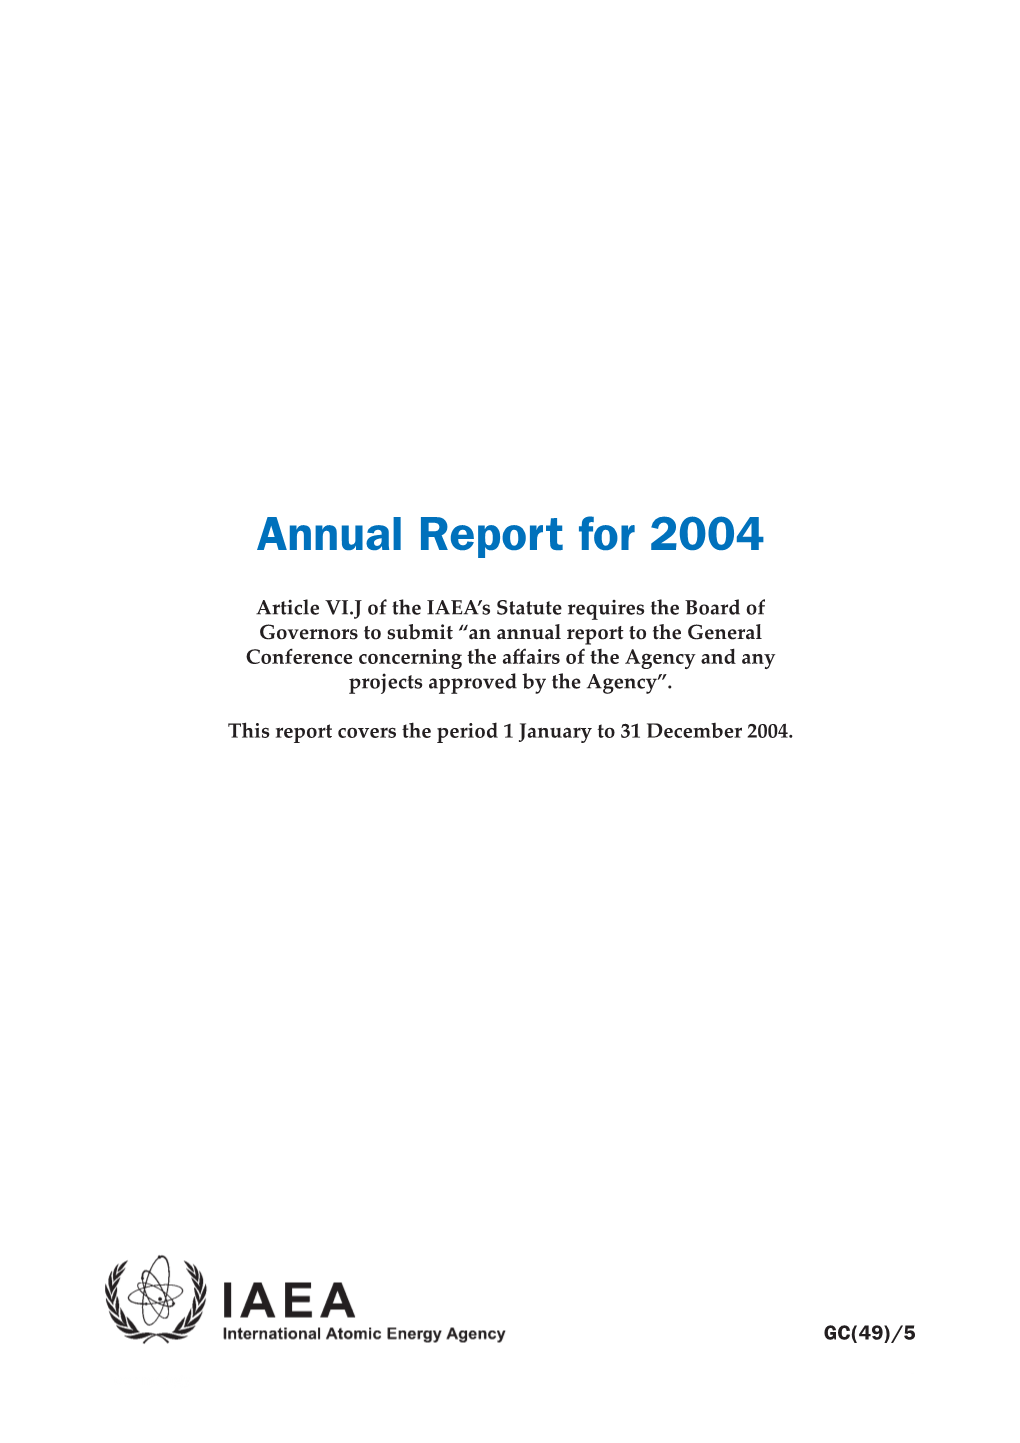 Annual Report 2004 Than 30 Years, While a Further 143 Reactors Had Cooperation Is in Developing an Agreed Method to Been in Operation for More Than 25 Years